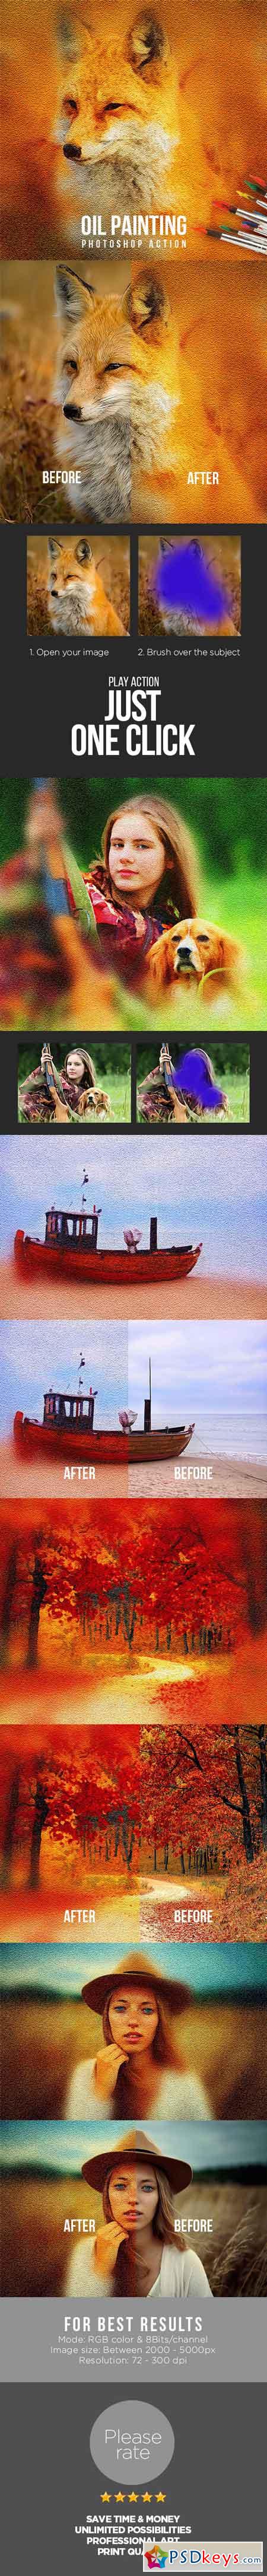 Oil Painting Photoshop Action 19175001